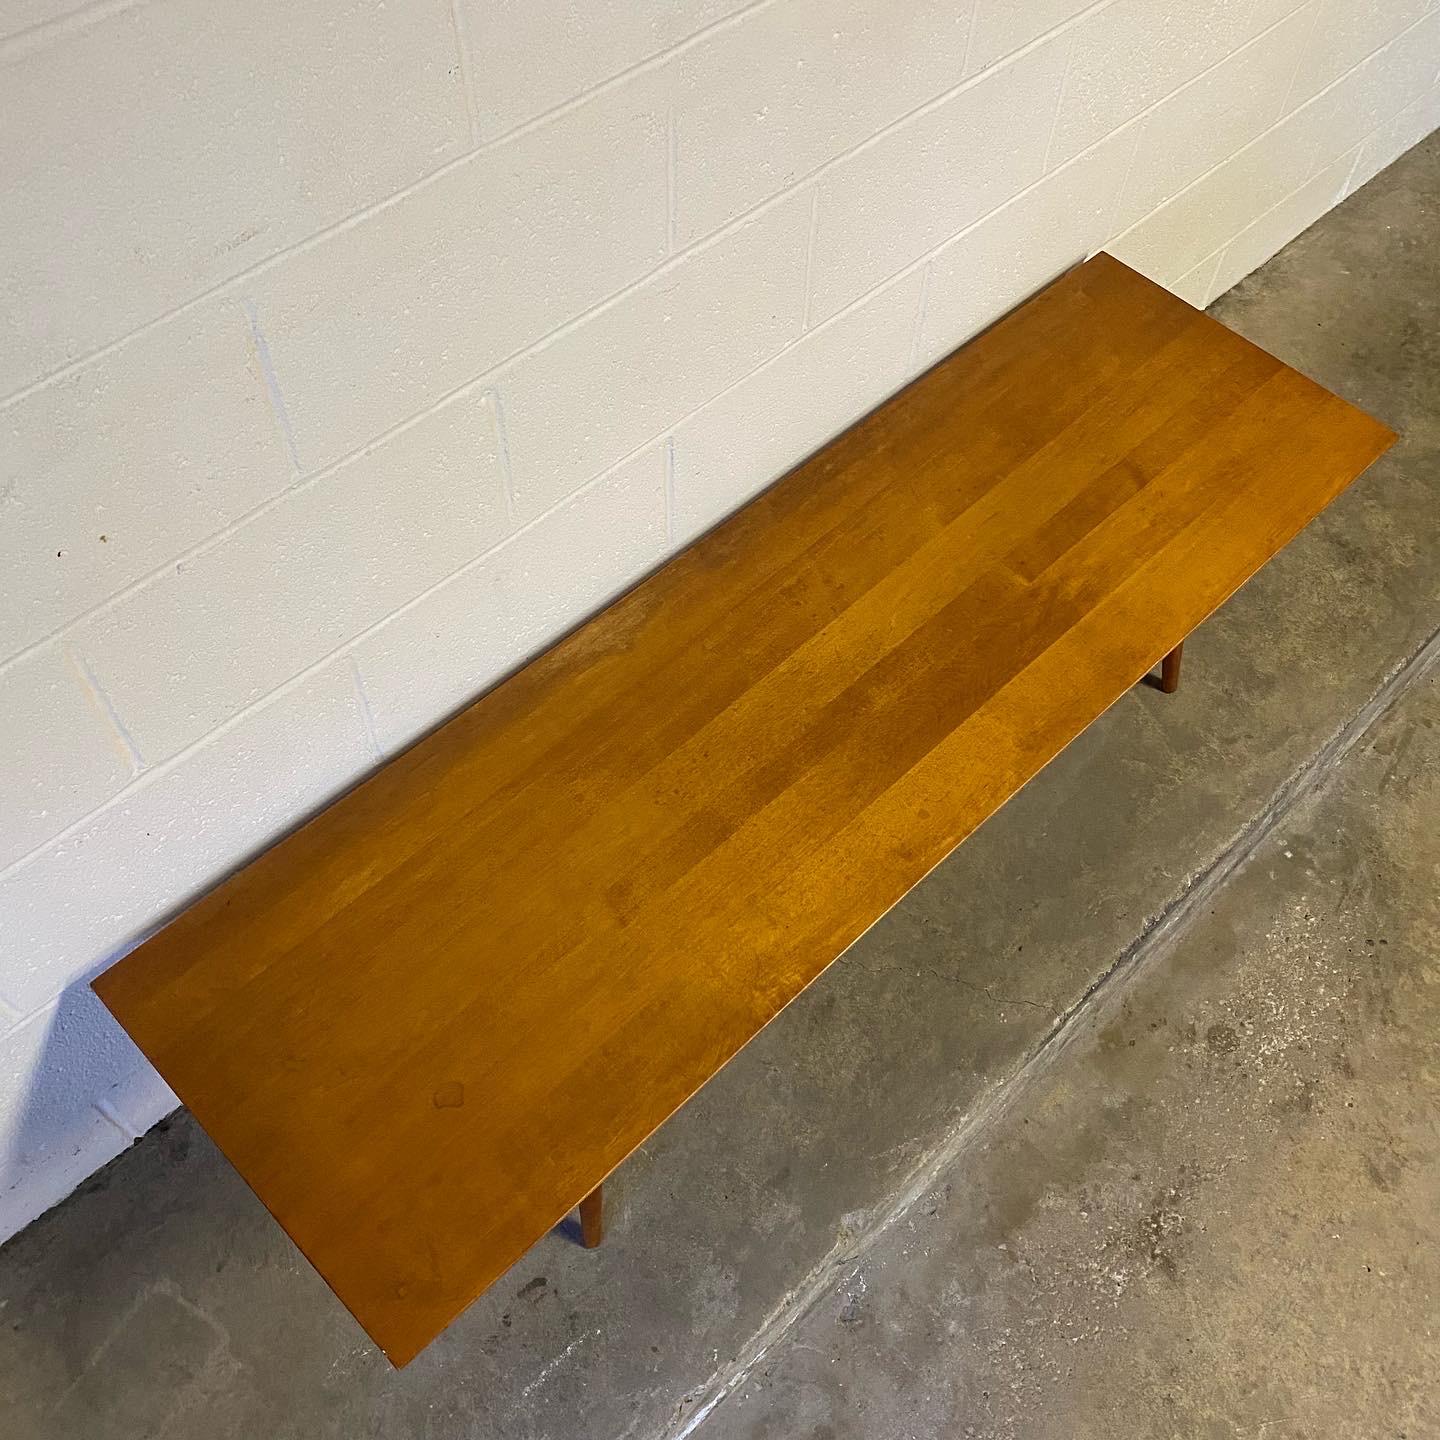 This is a nice vintage solid maple coffee table or bench designed by Paul McCobb for his Planner Group produced by Winchendon Furniture Co. in the 1950’s. This particular piece has the original tobacco finish, sort of a mix between light walnut and